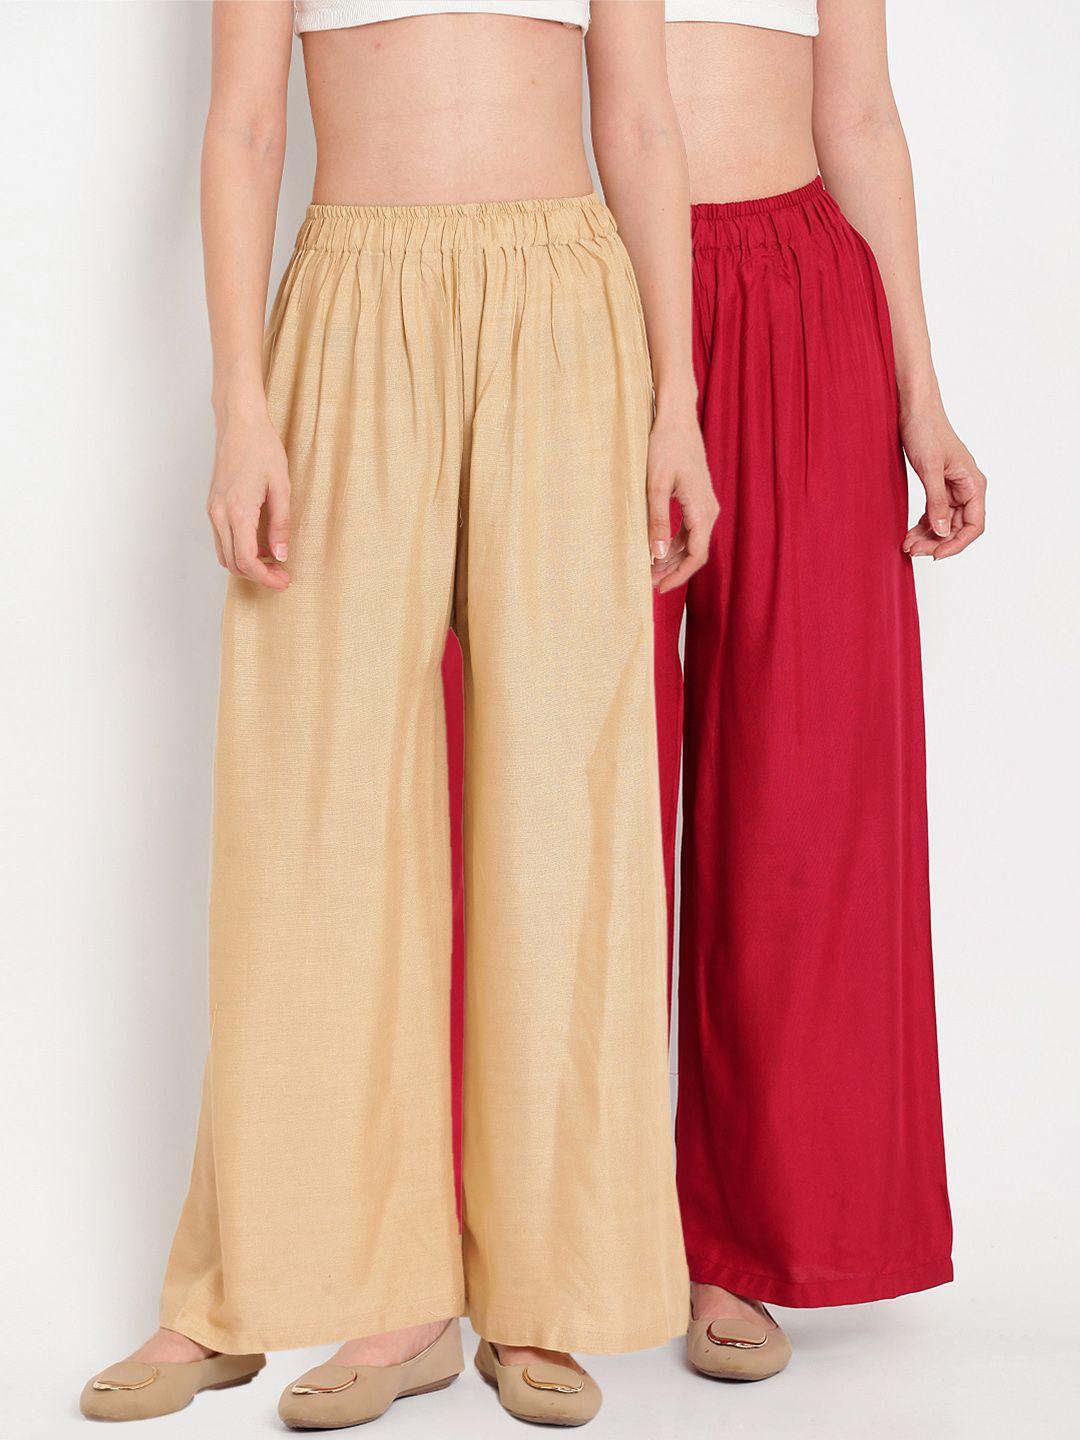 tag 7 women set of 2 maroon & beige solid flared palazzos